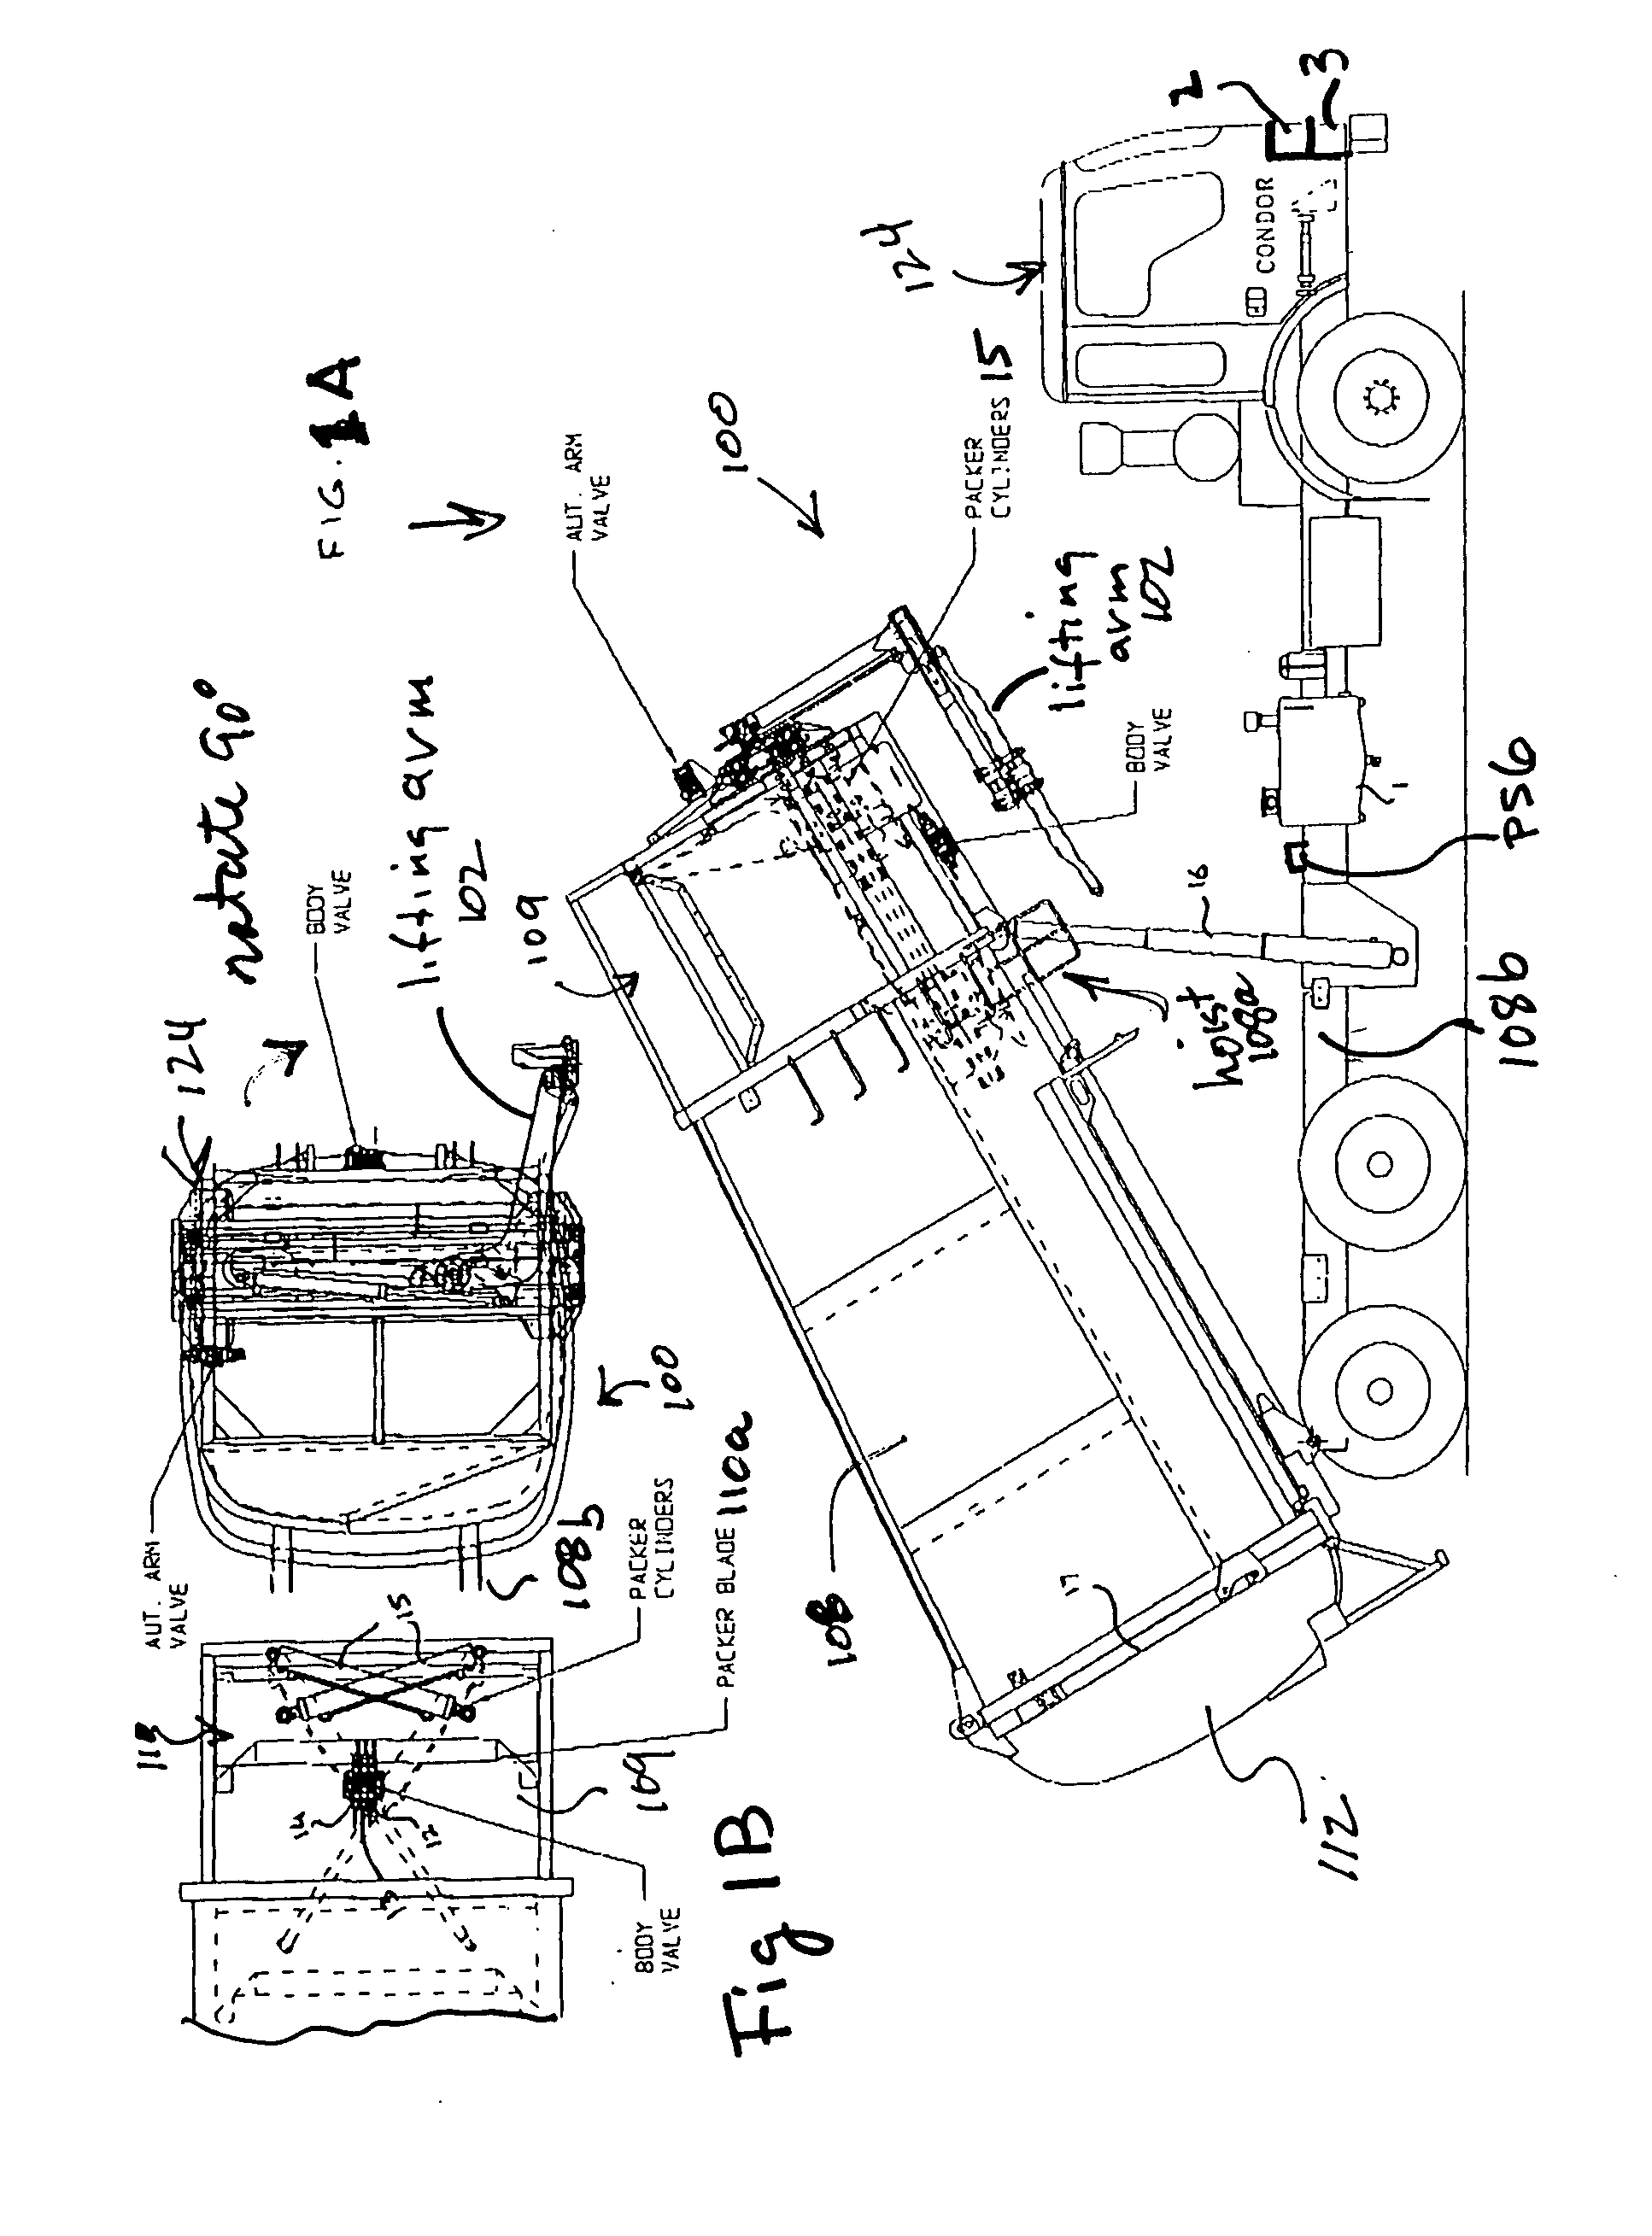 Hydraulic control system for refuse collection vehicle